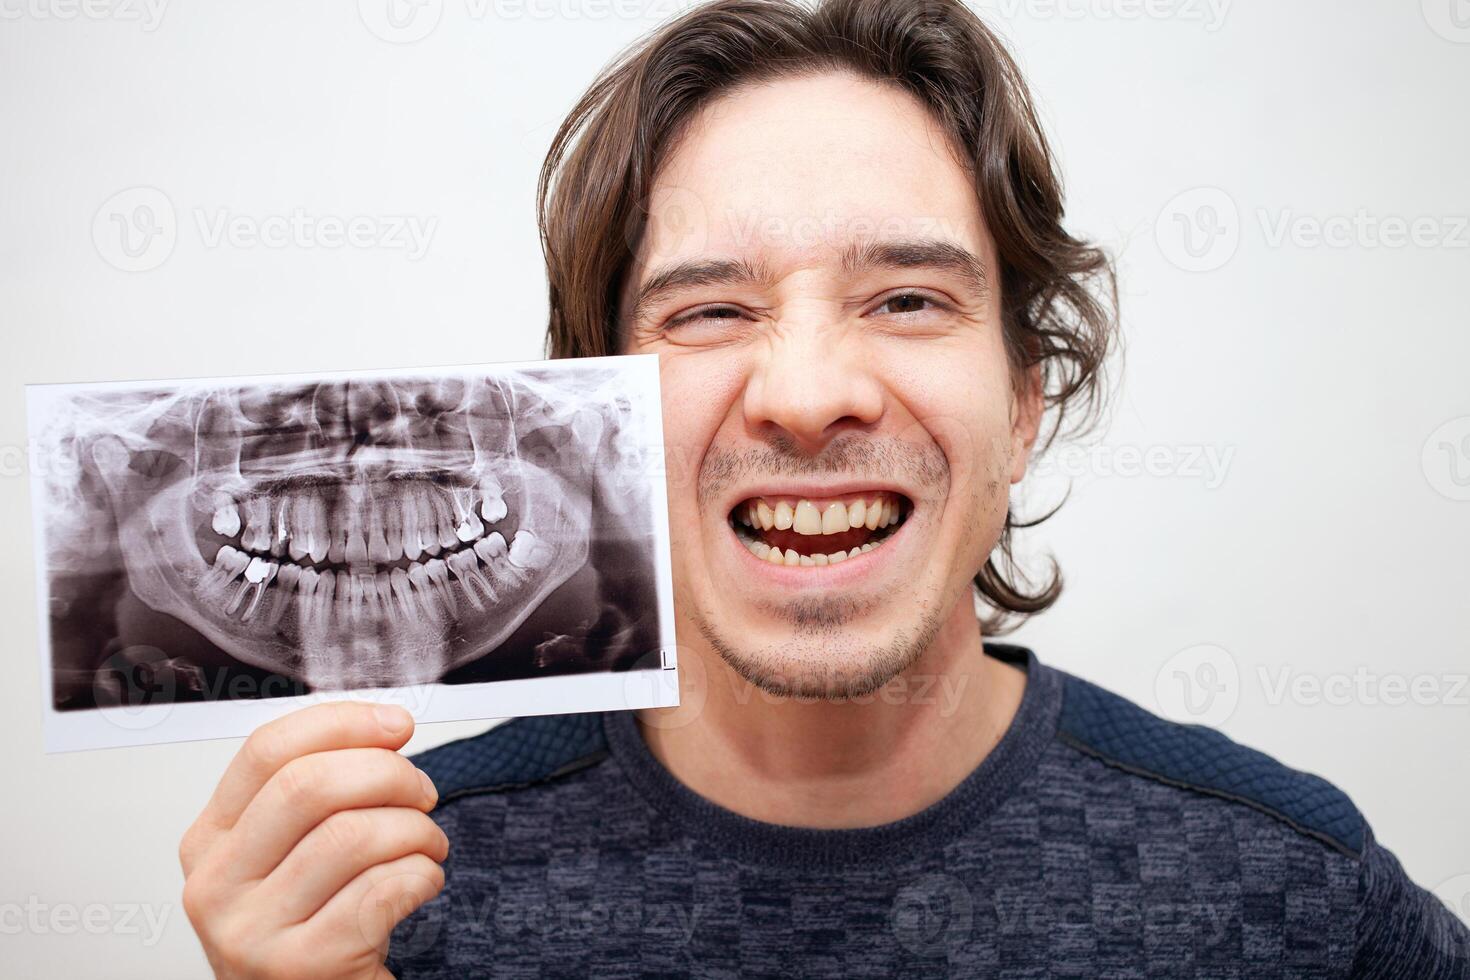 X-ray of teeth picture. man smiles, opens his mouth. Poses, portrait. isolated photo